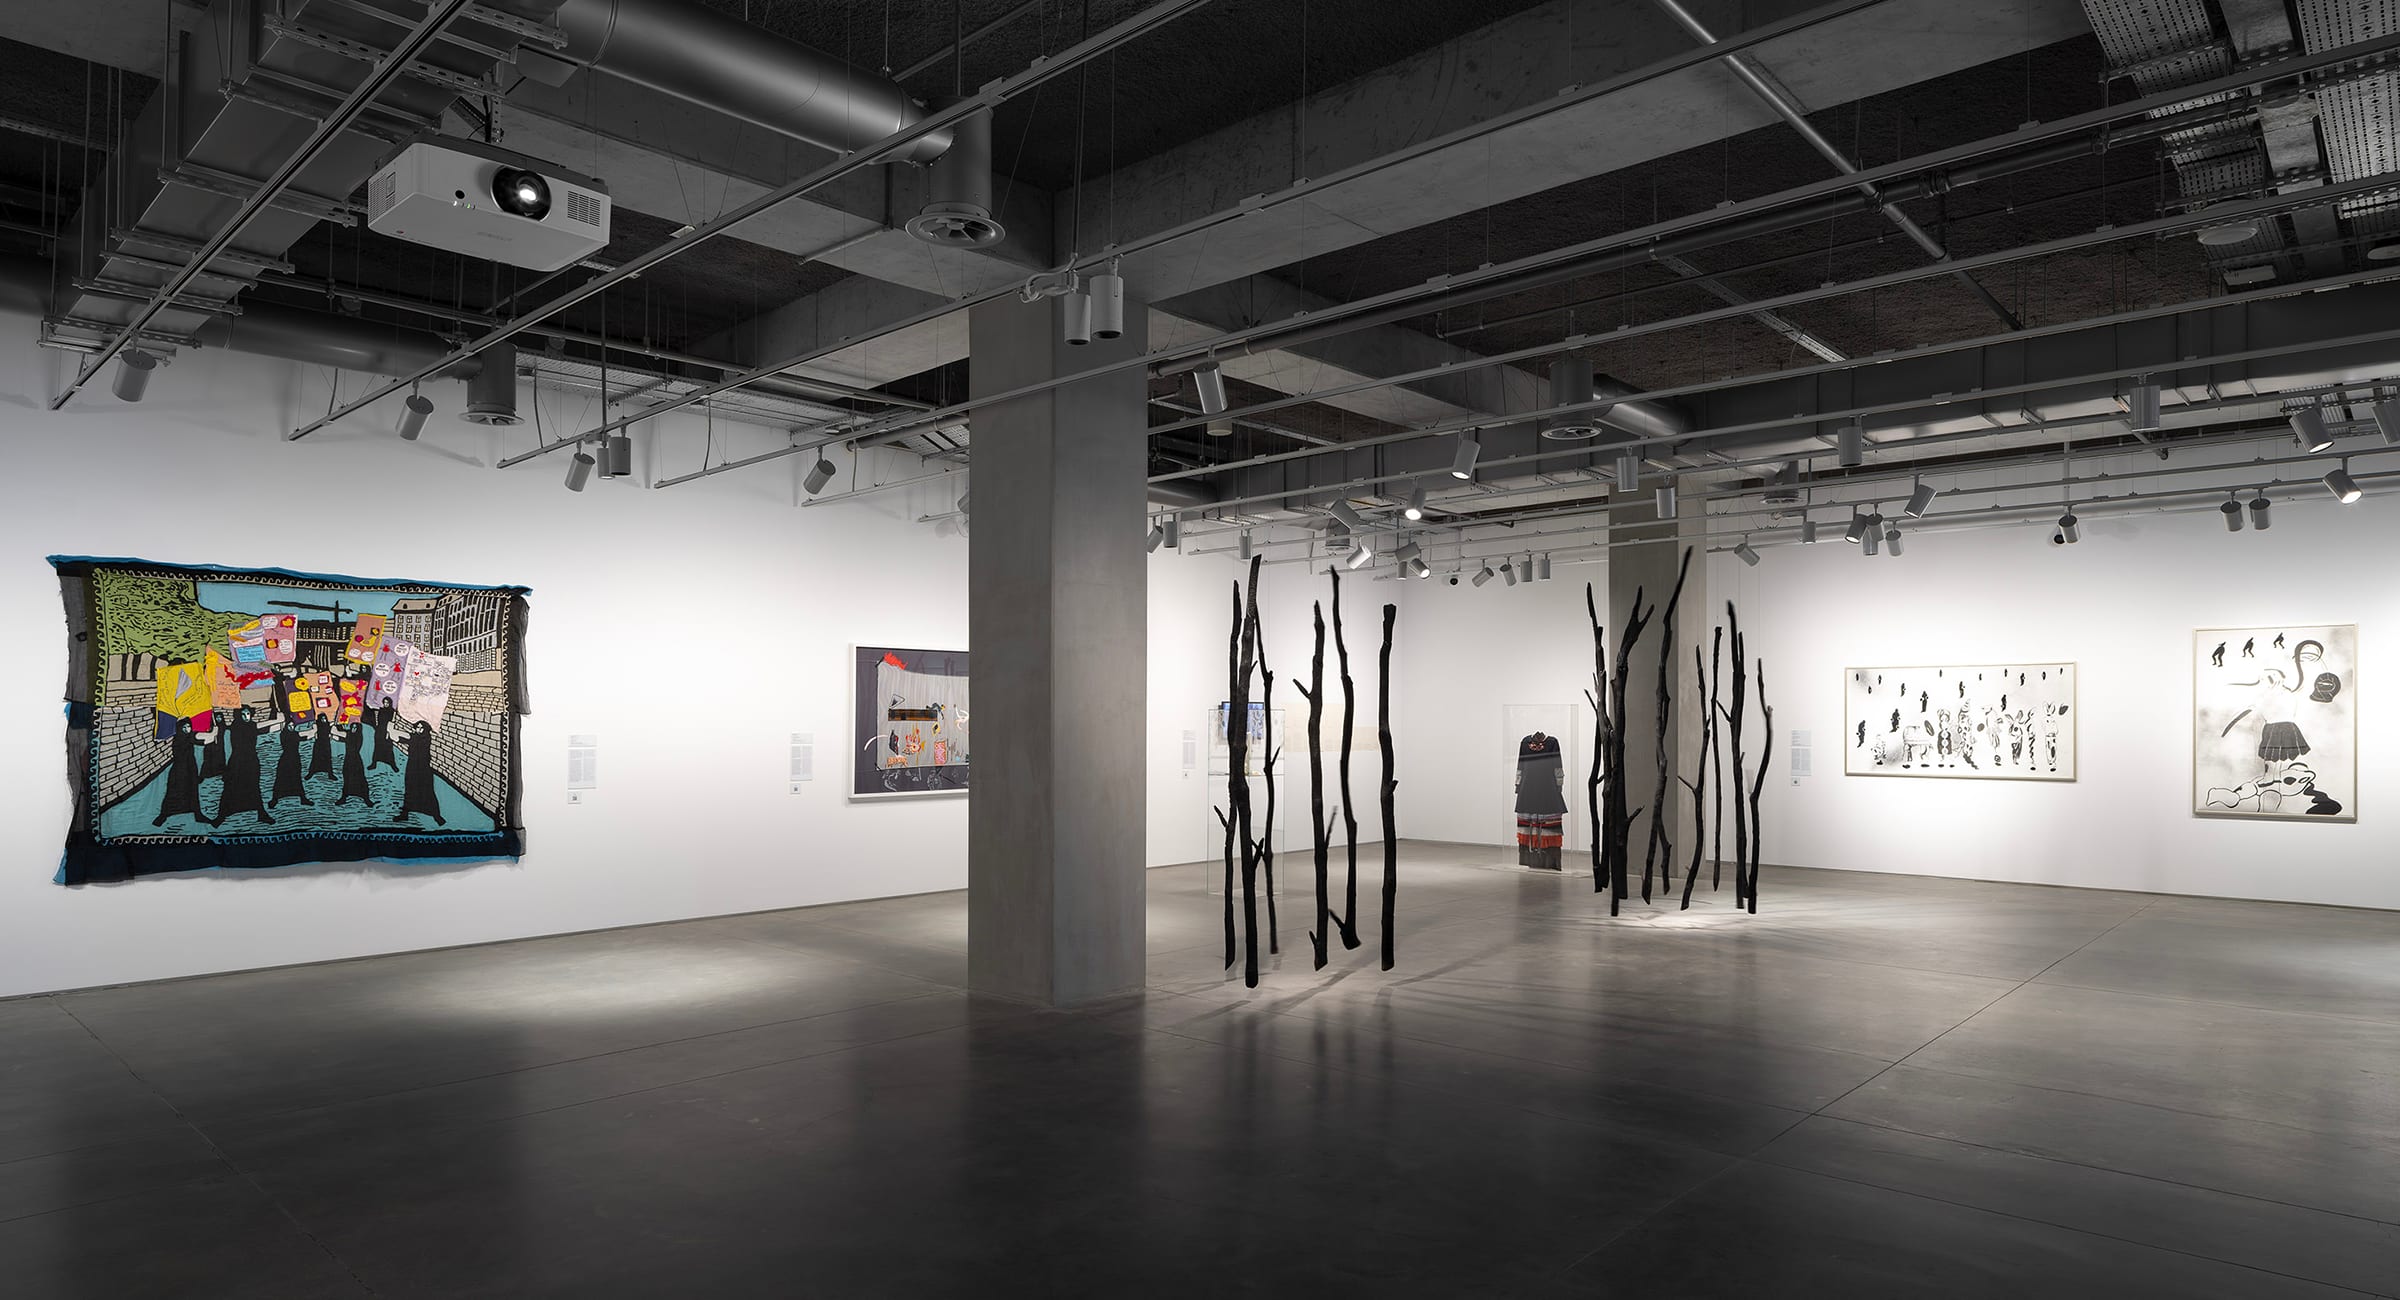 Installation view of ‘Always Here’. Photograph by Enrico Cano.